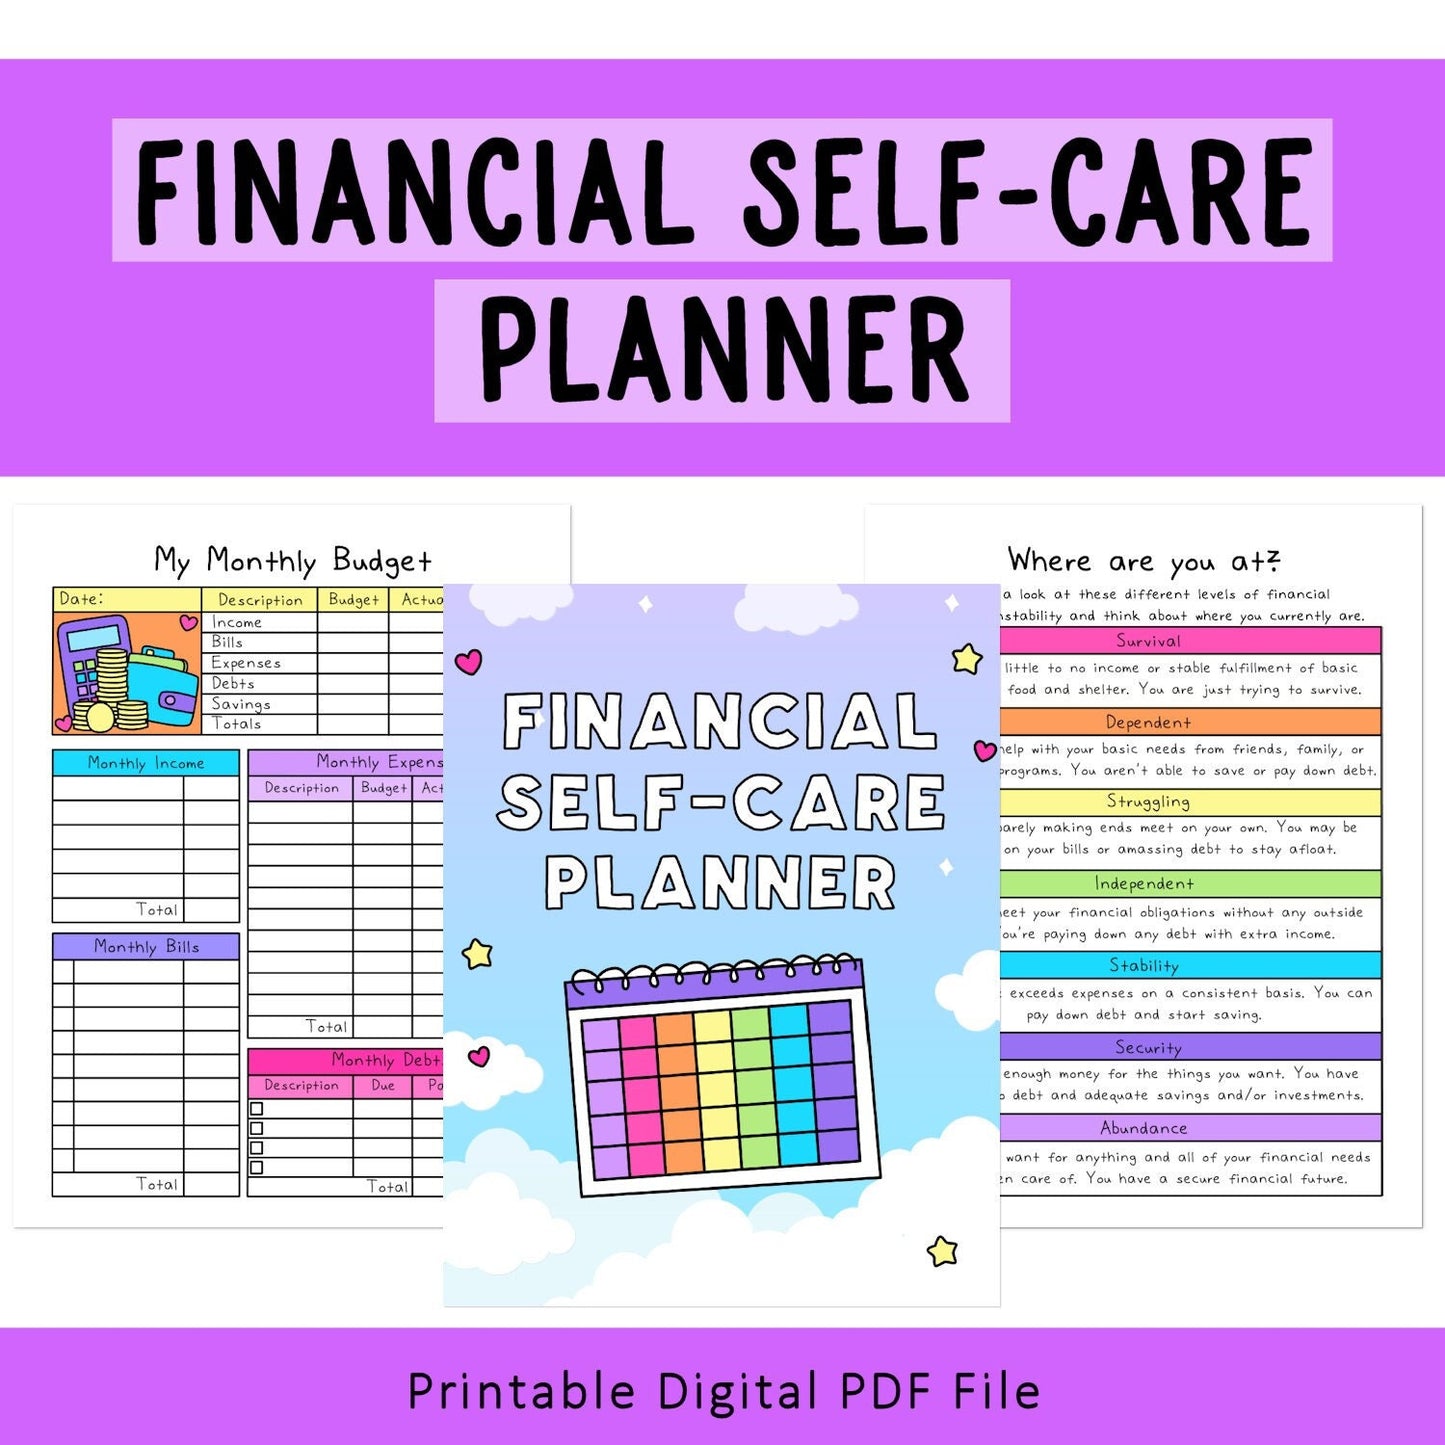 Financial Self-Care Workbook and Planner